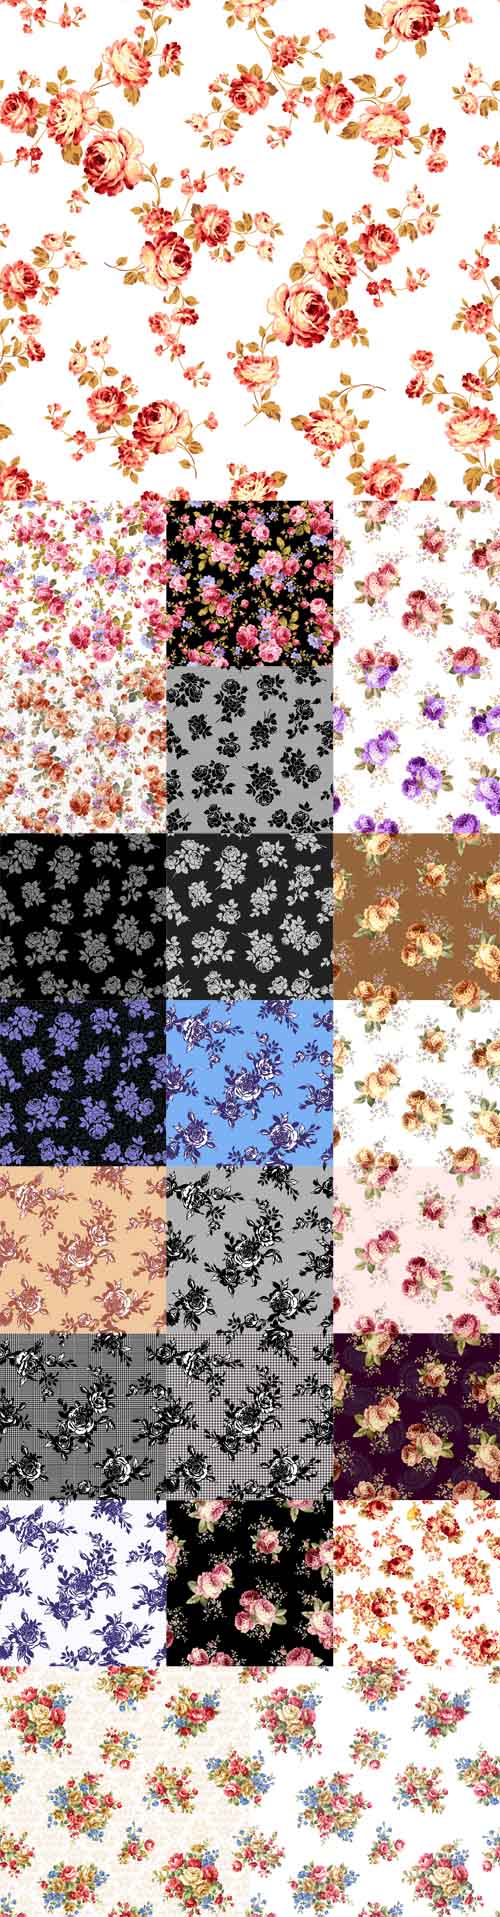 Vector 25 Roses Seamless Patterns